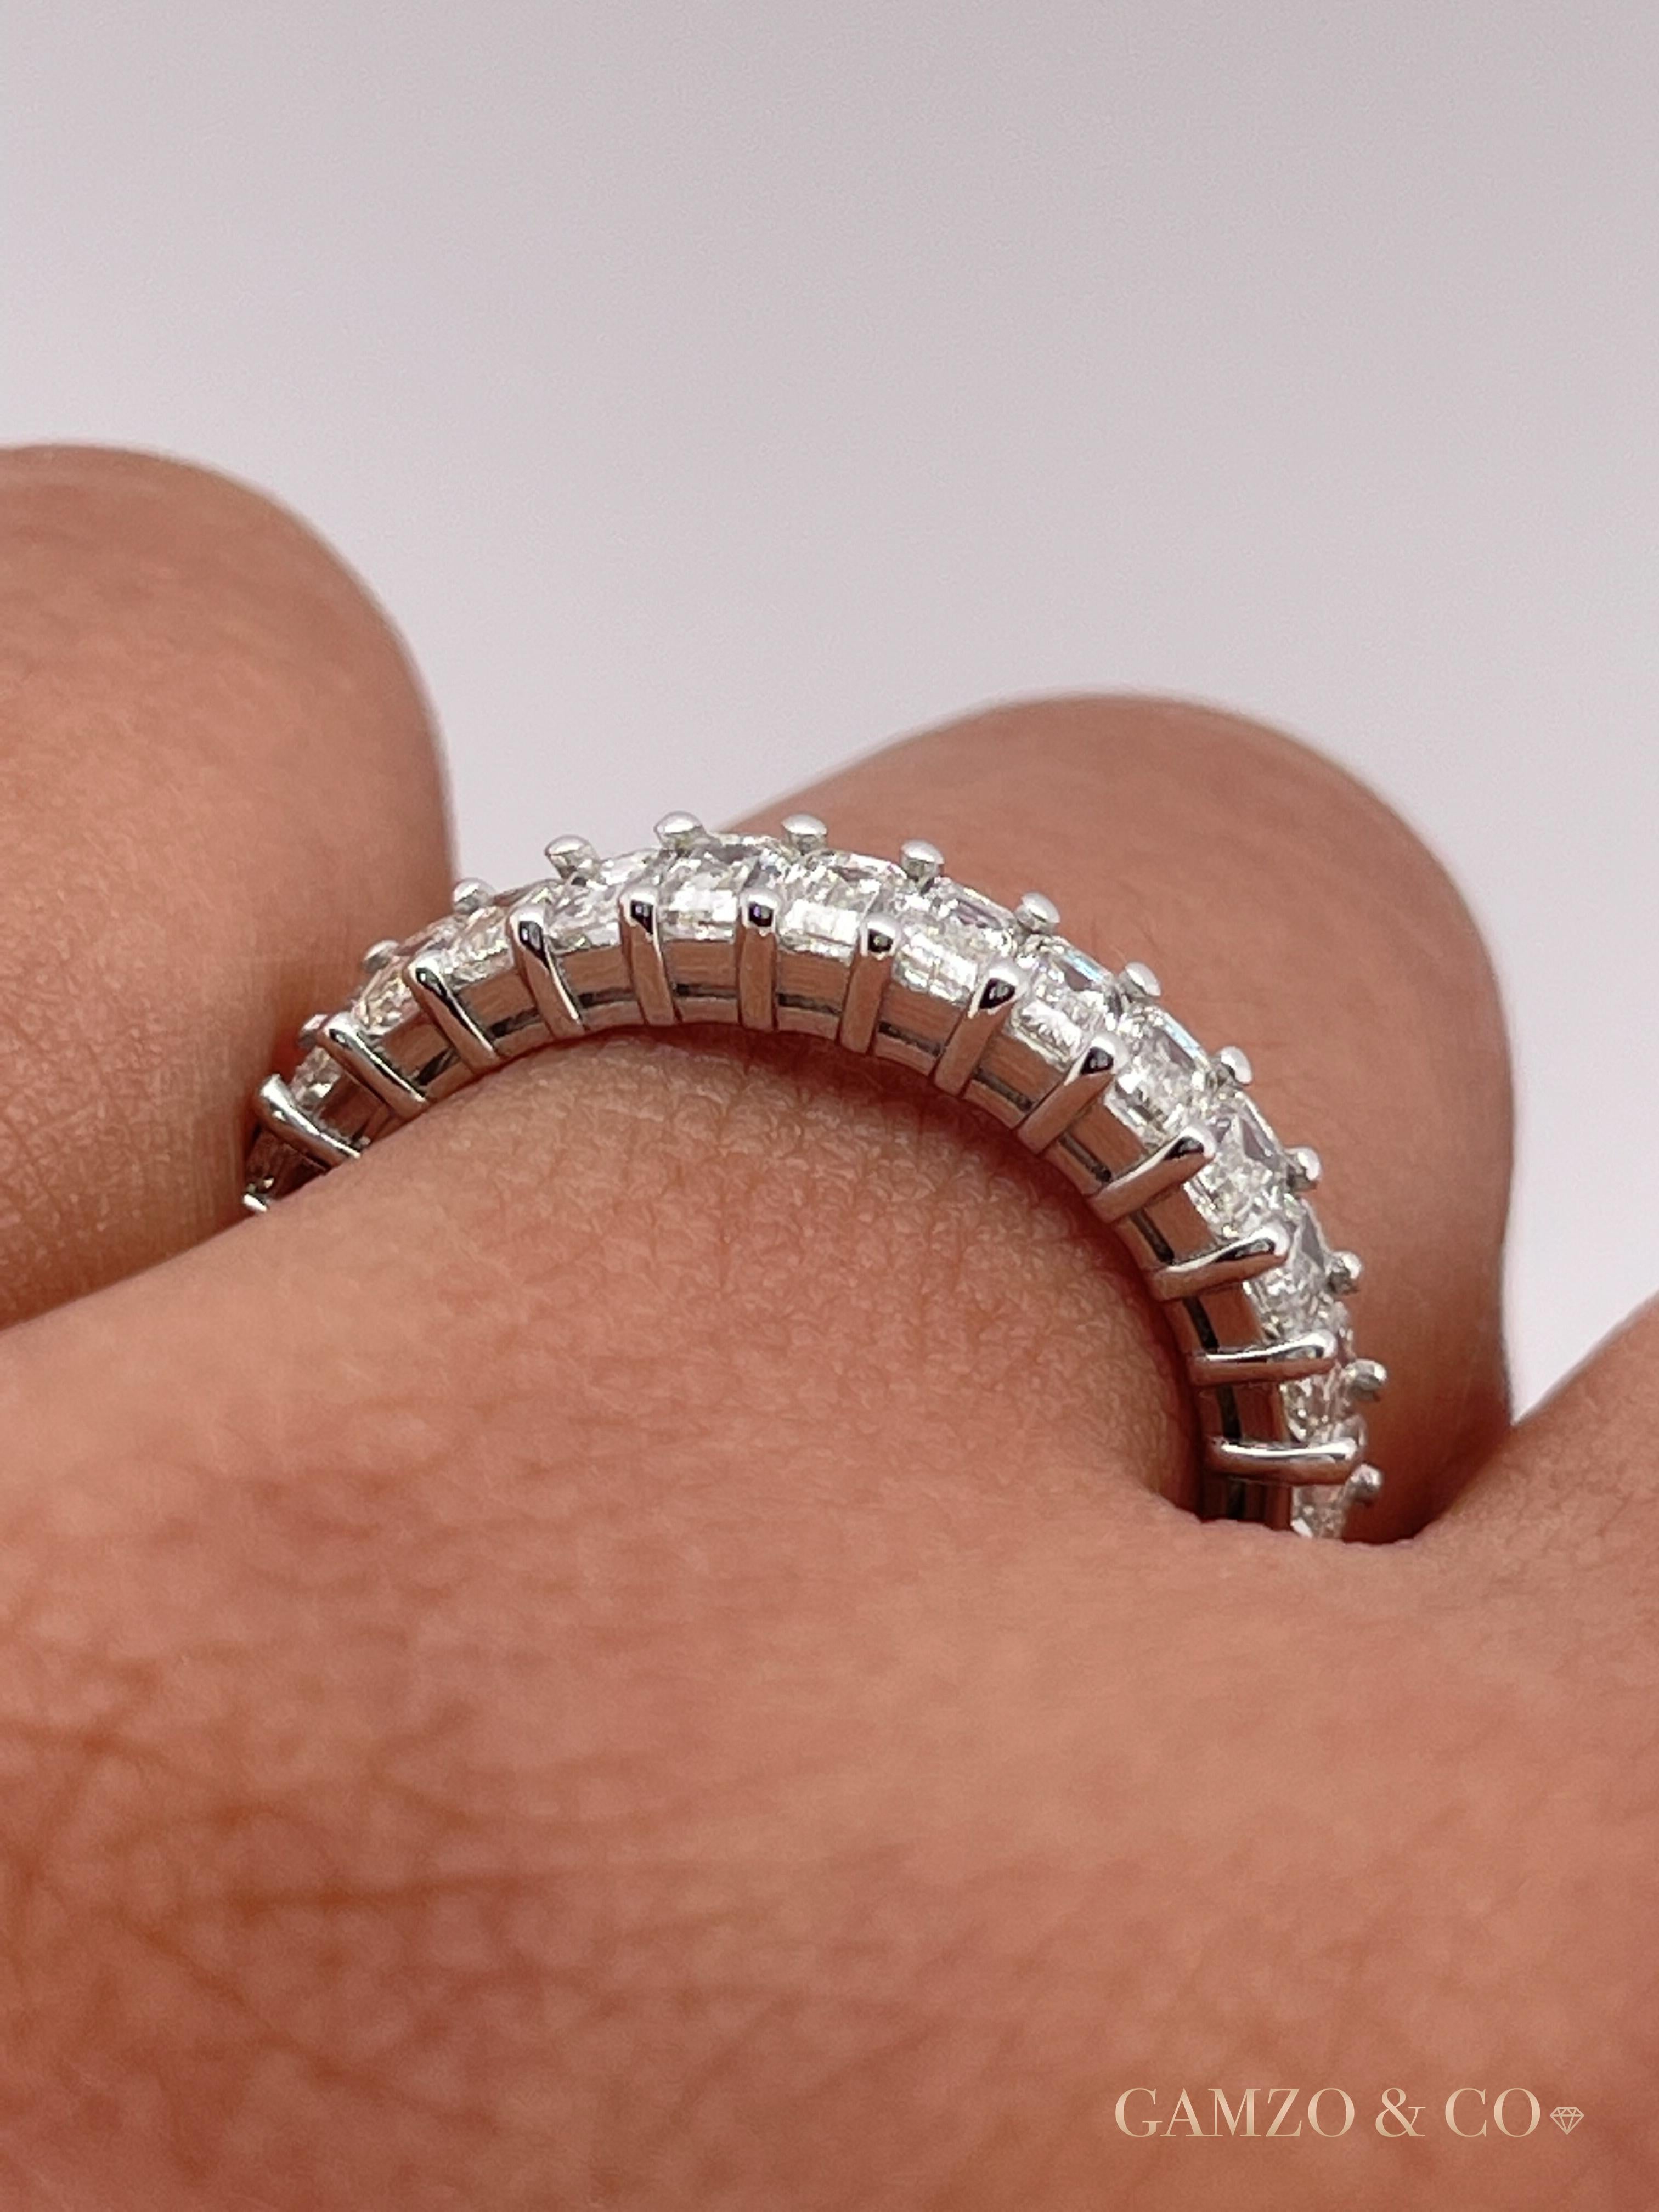 For Sale:  18k White Gold 4 Carat Natural Emerald Cut Diamond Eternity Ring 4